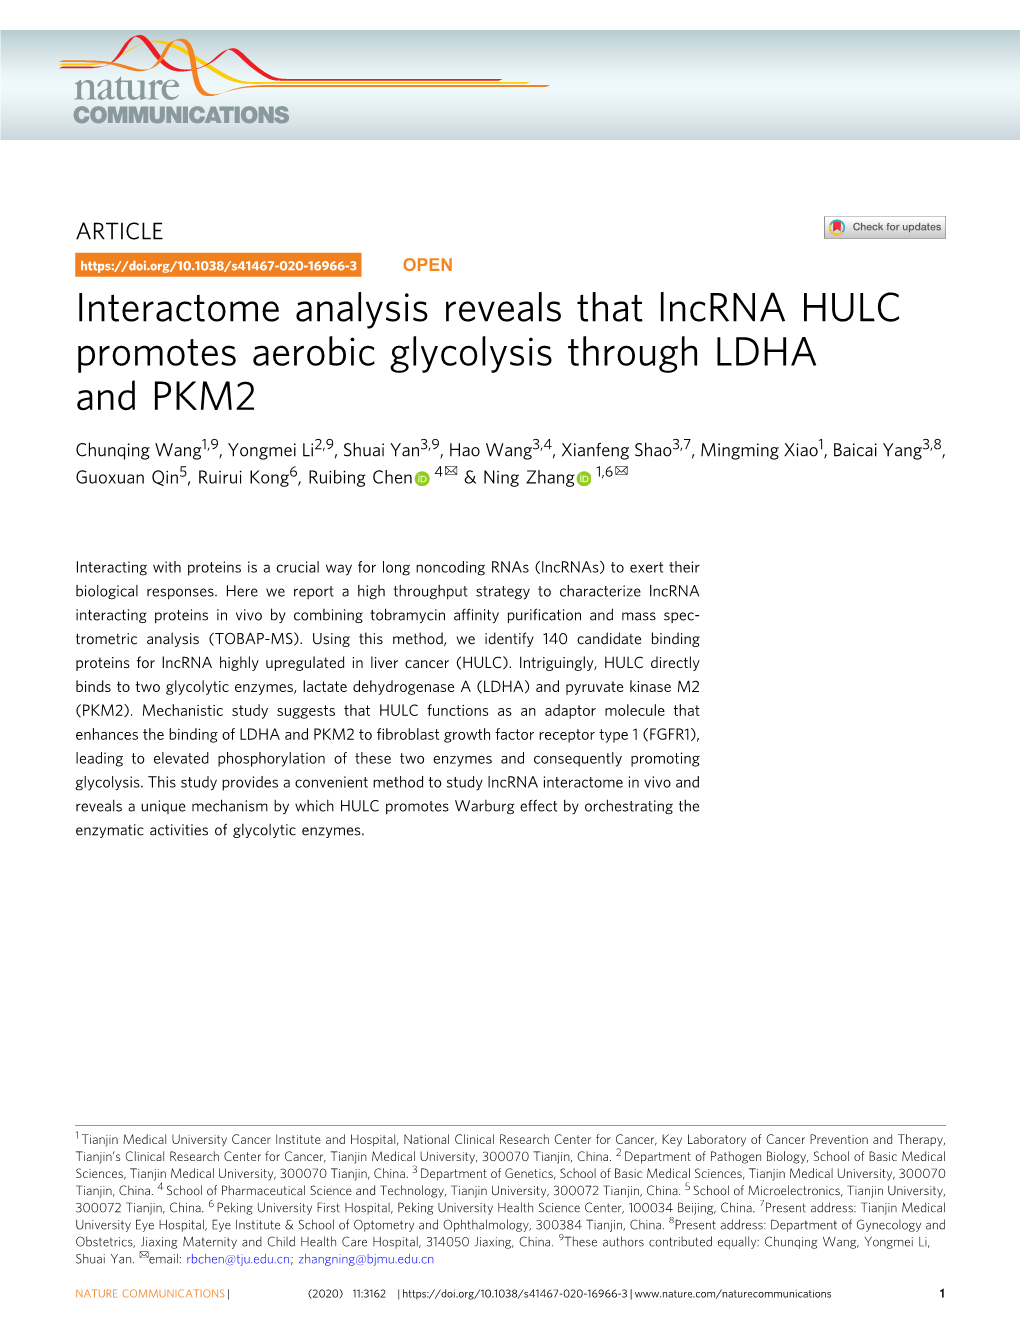 Interactome Analysis Reveals That Lncrna HULC Promotes Aerobic Glycolysis Through LDHA and PKM2